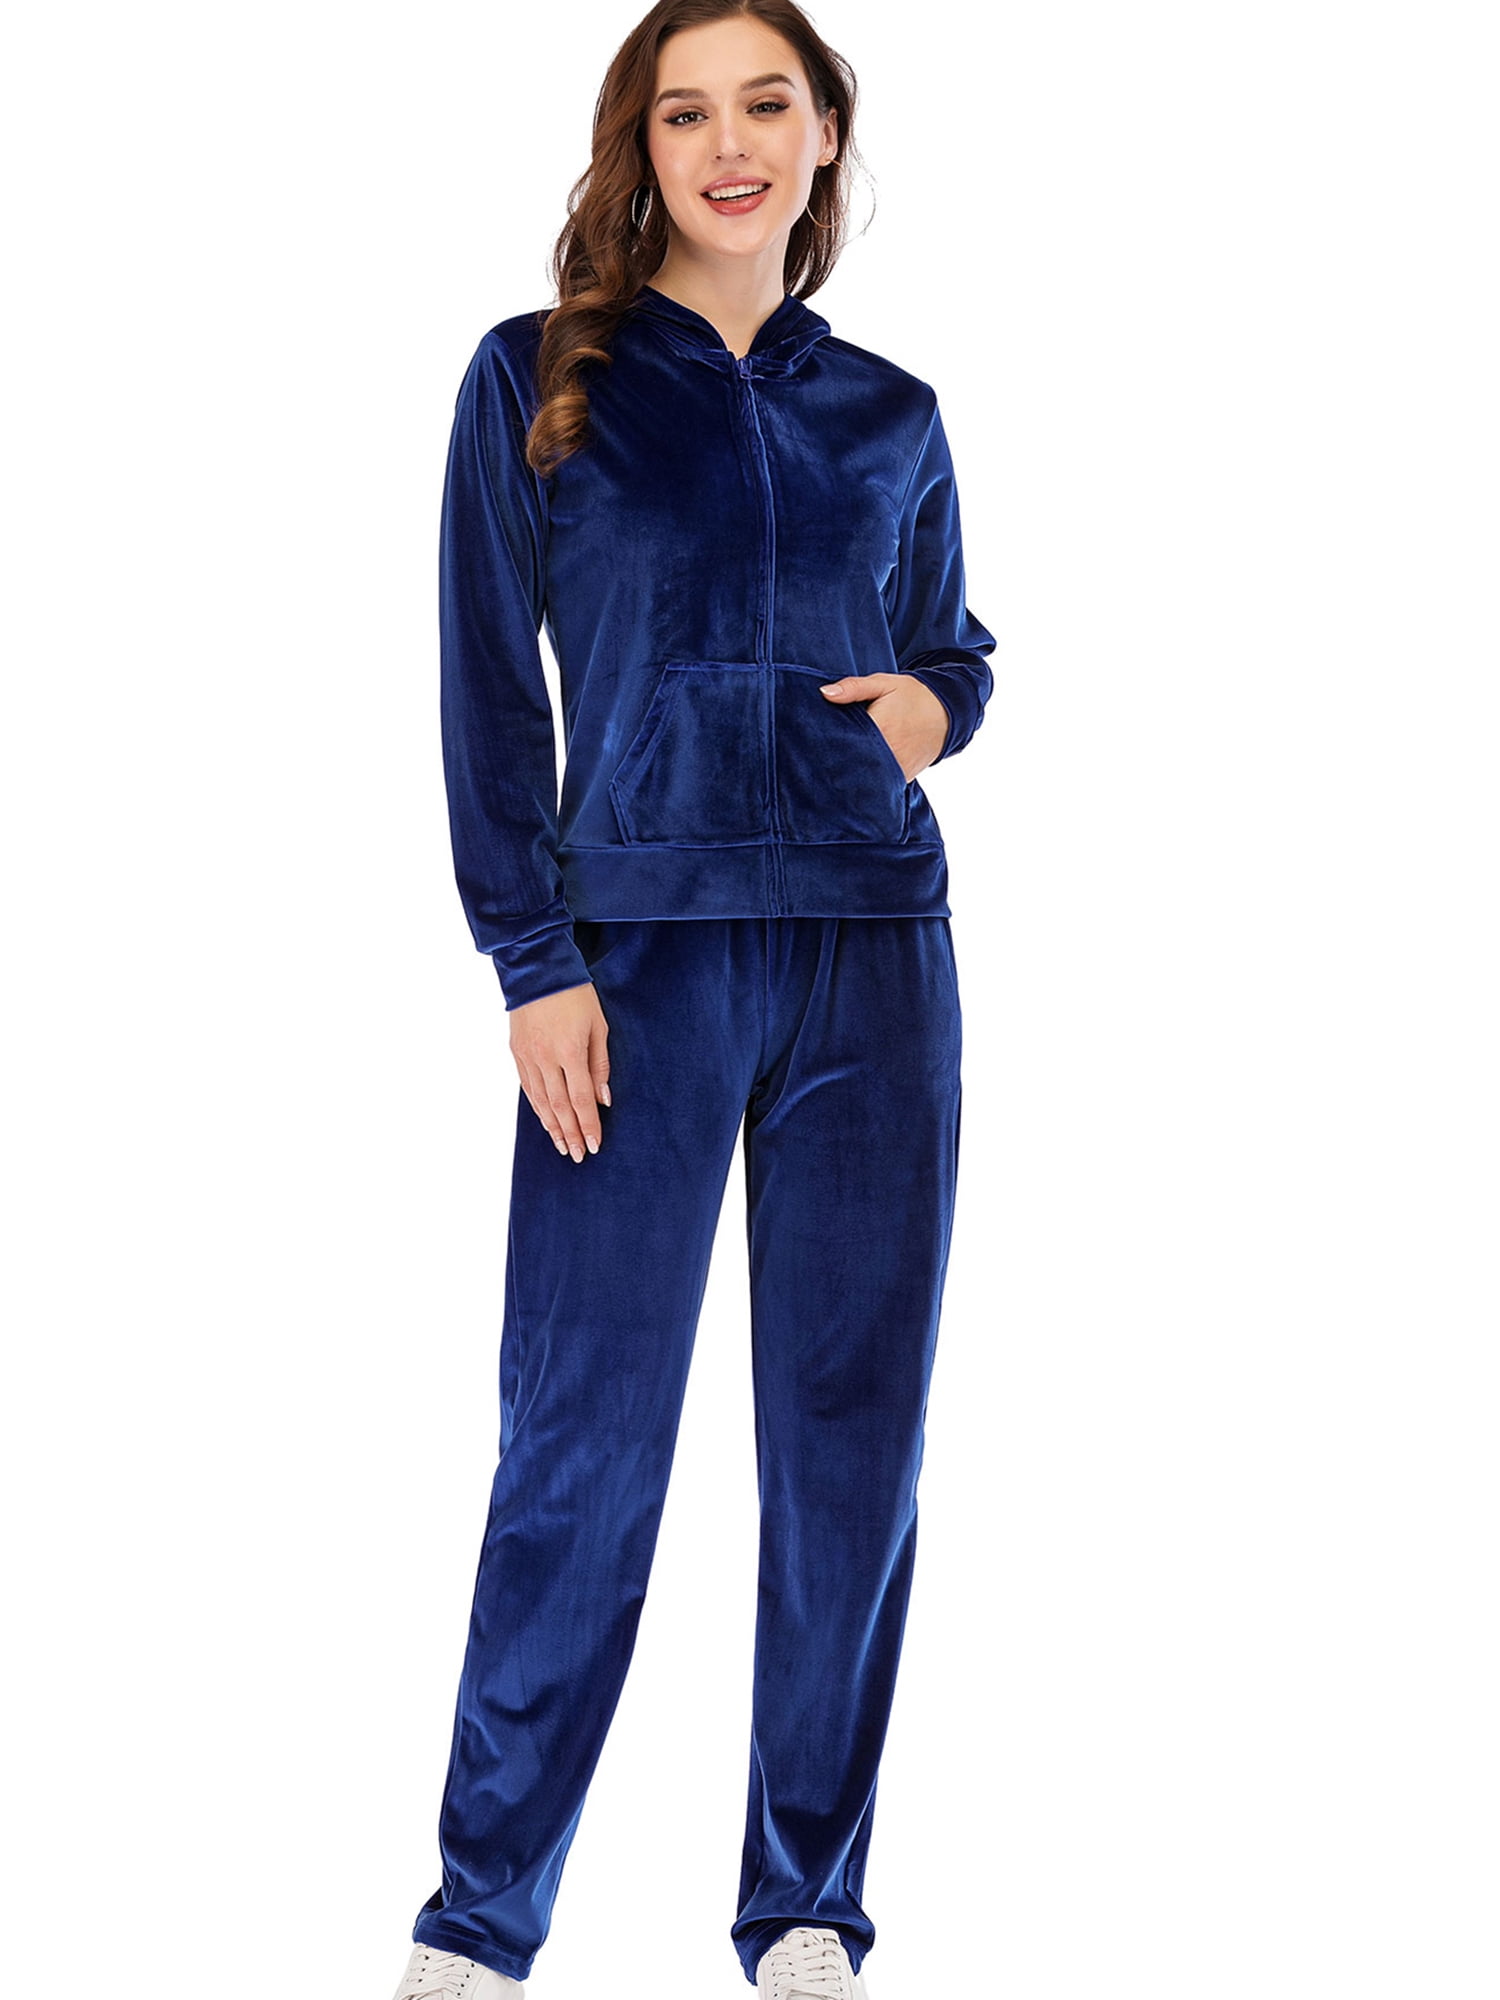 Velour Tracksuit Womens Jogging Outfit 2 Pieces Zip Up Winter Warm Running Sweatsuit Sets 